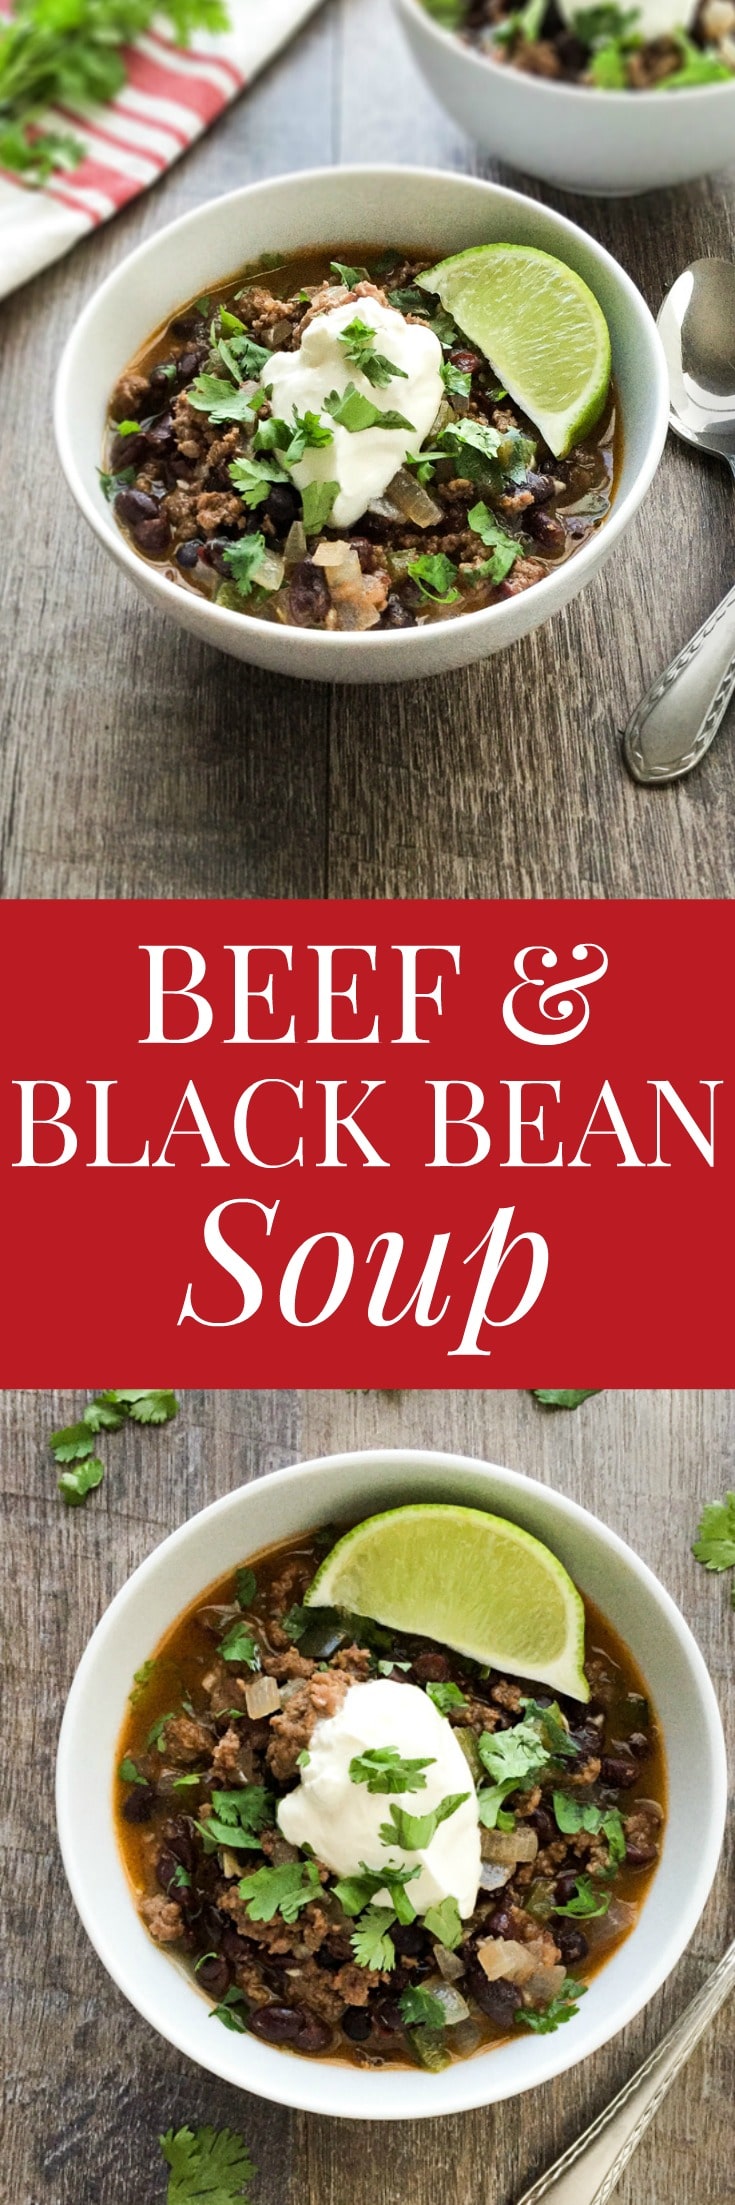 Beef and Black Bean Soup